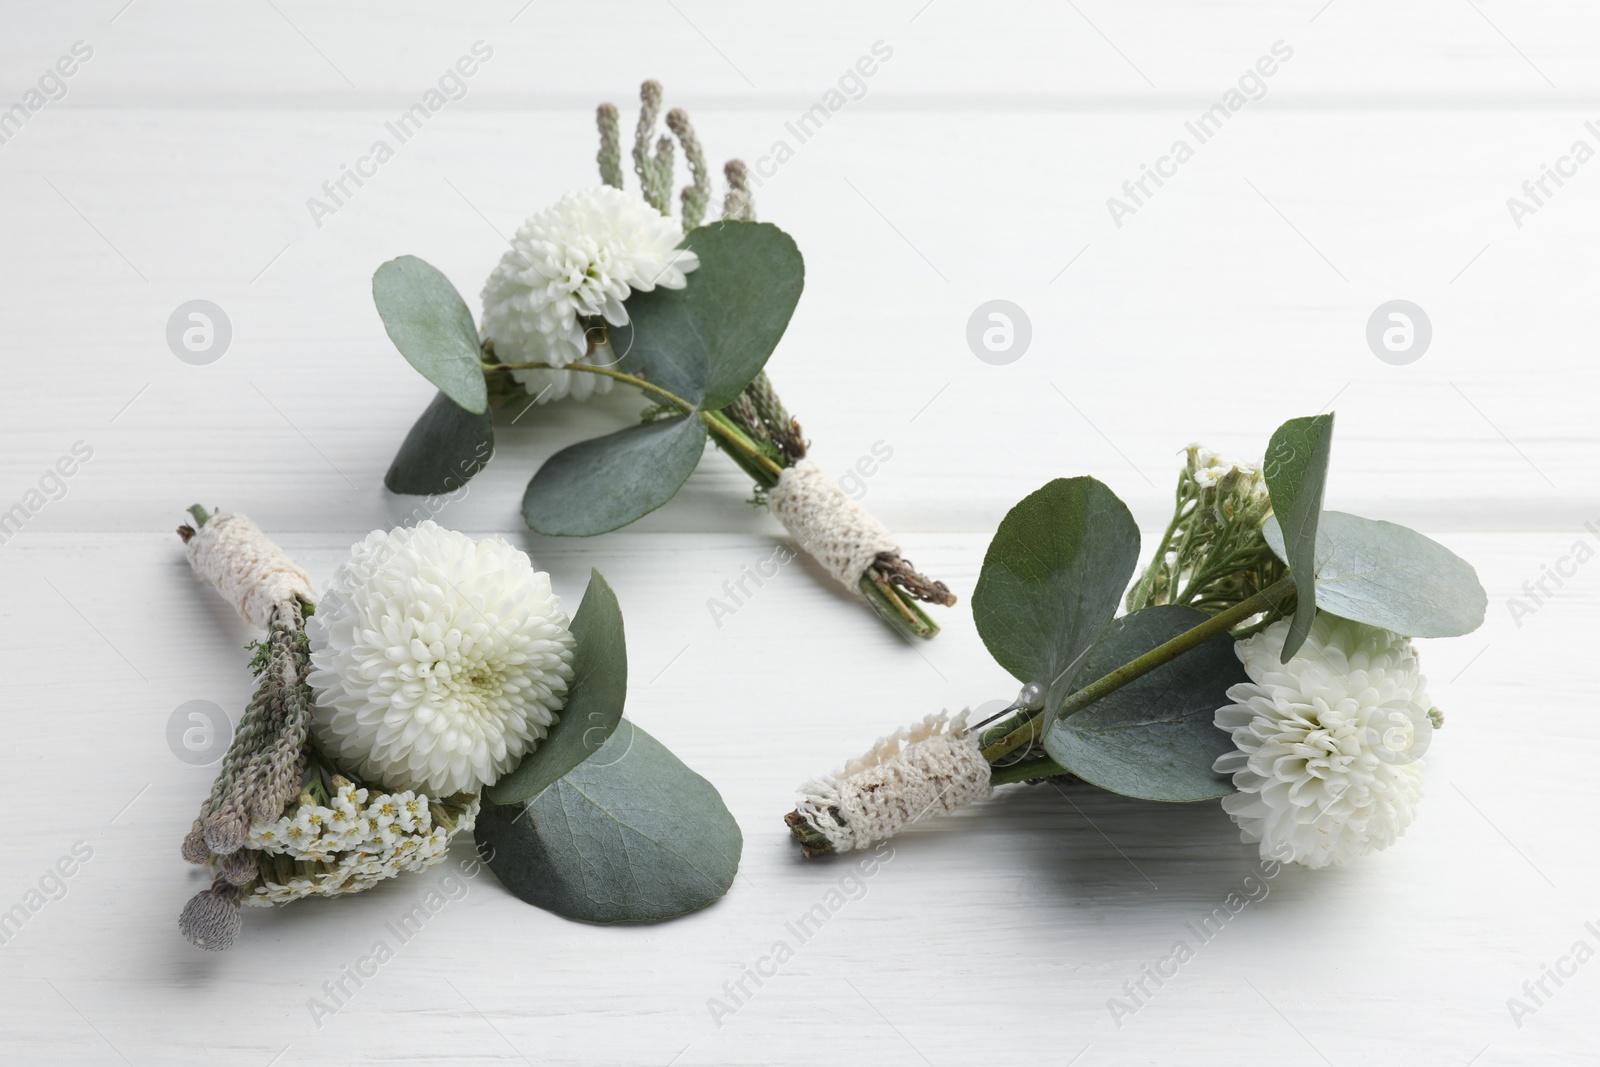 Photo of Small stylish boutonnieres on white wooden table